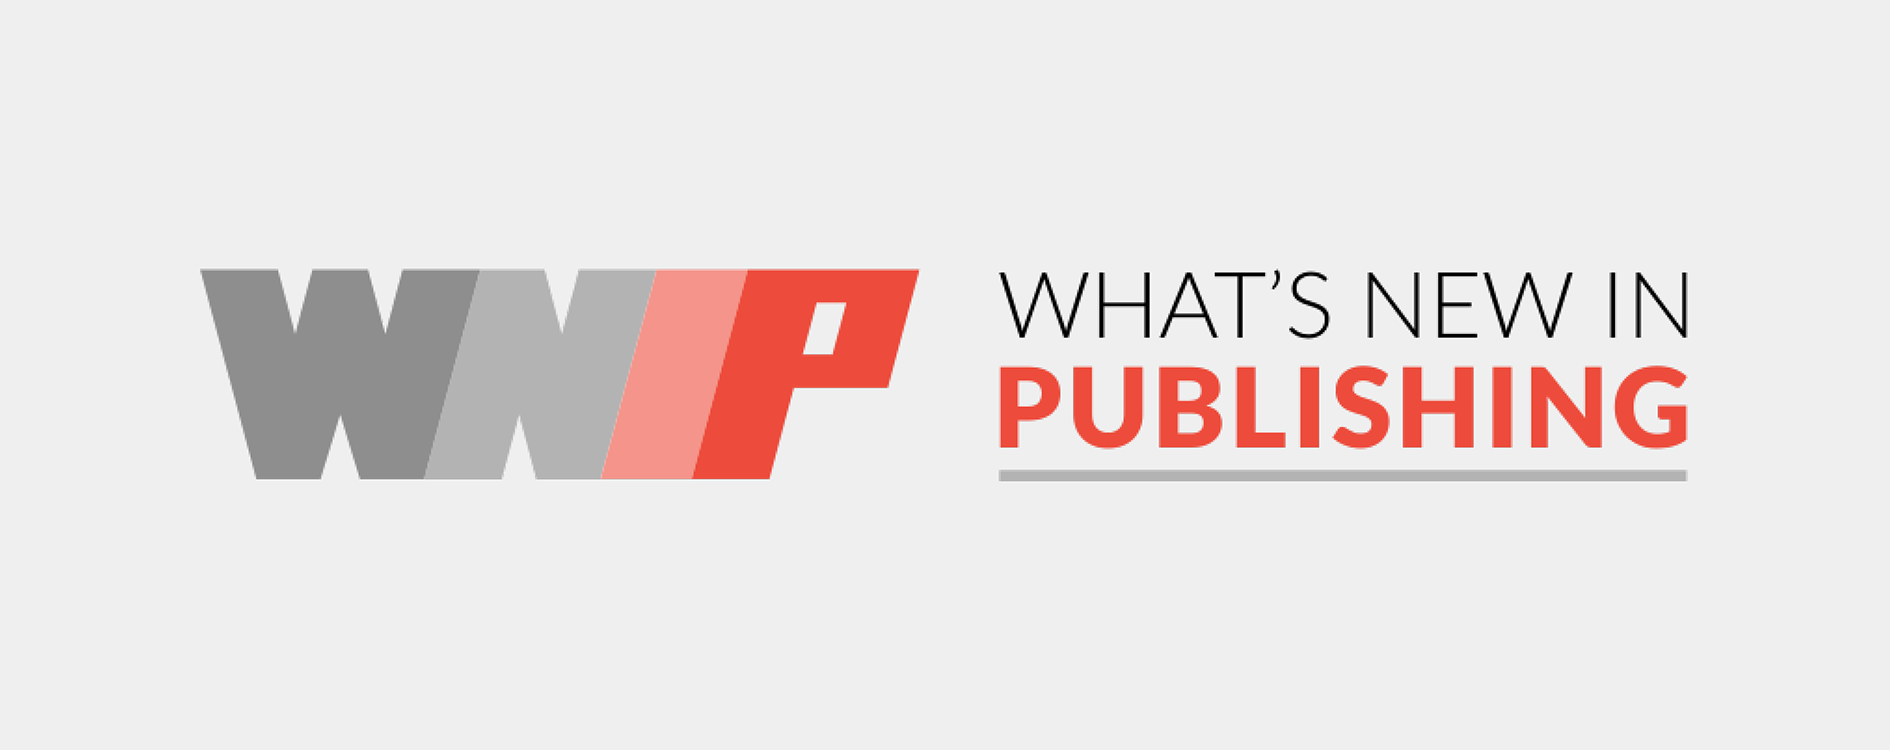 33A22_NewsMedia_Featured Banner_What’s New In Publishing